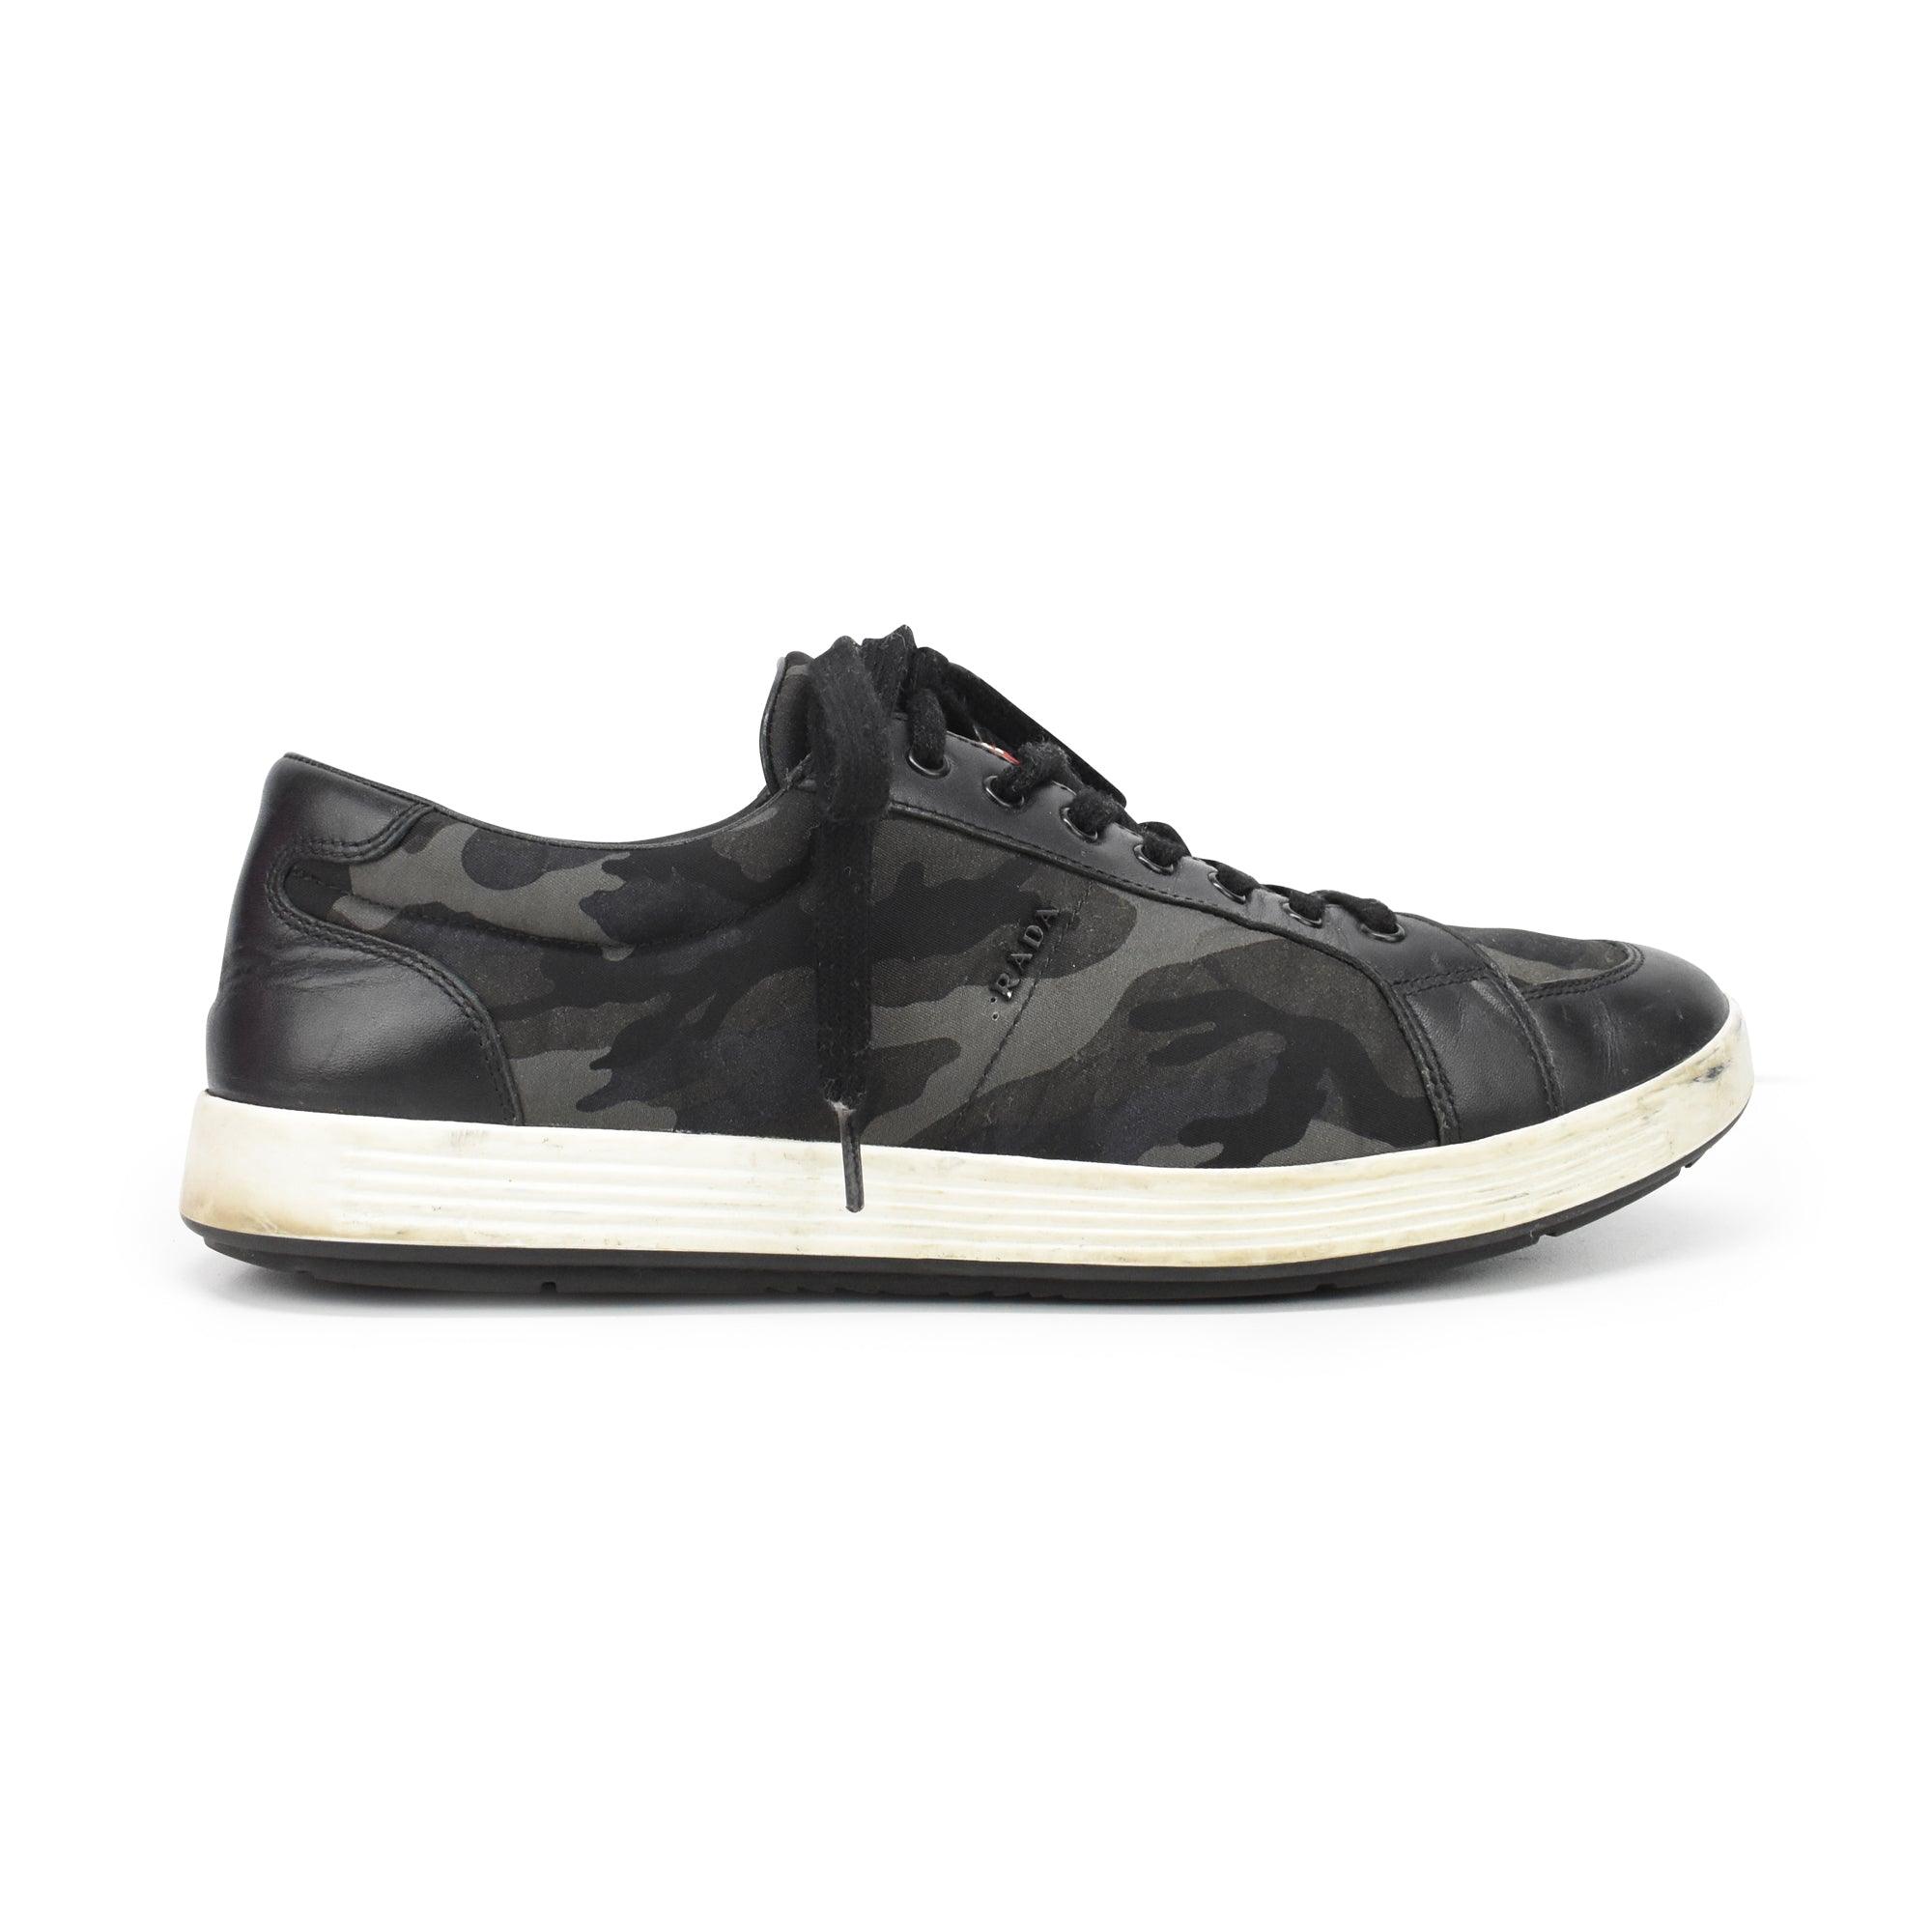 Prada Sneakers - Men's 9.5 - Fashionably Yours